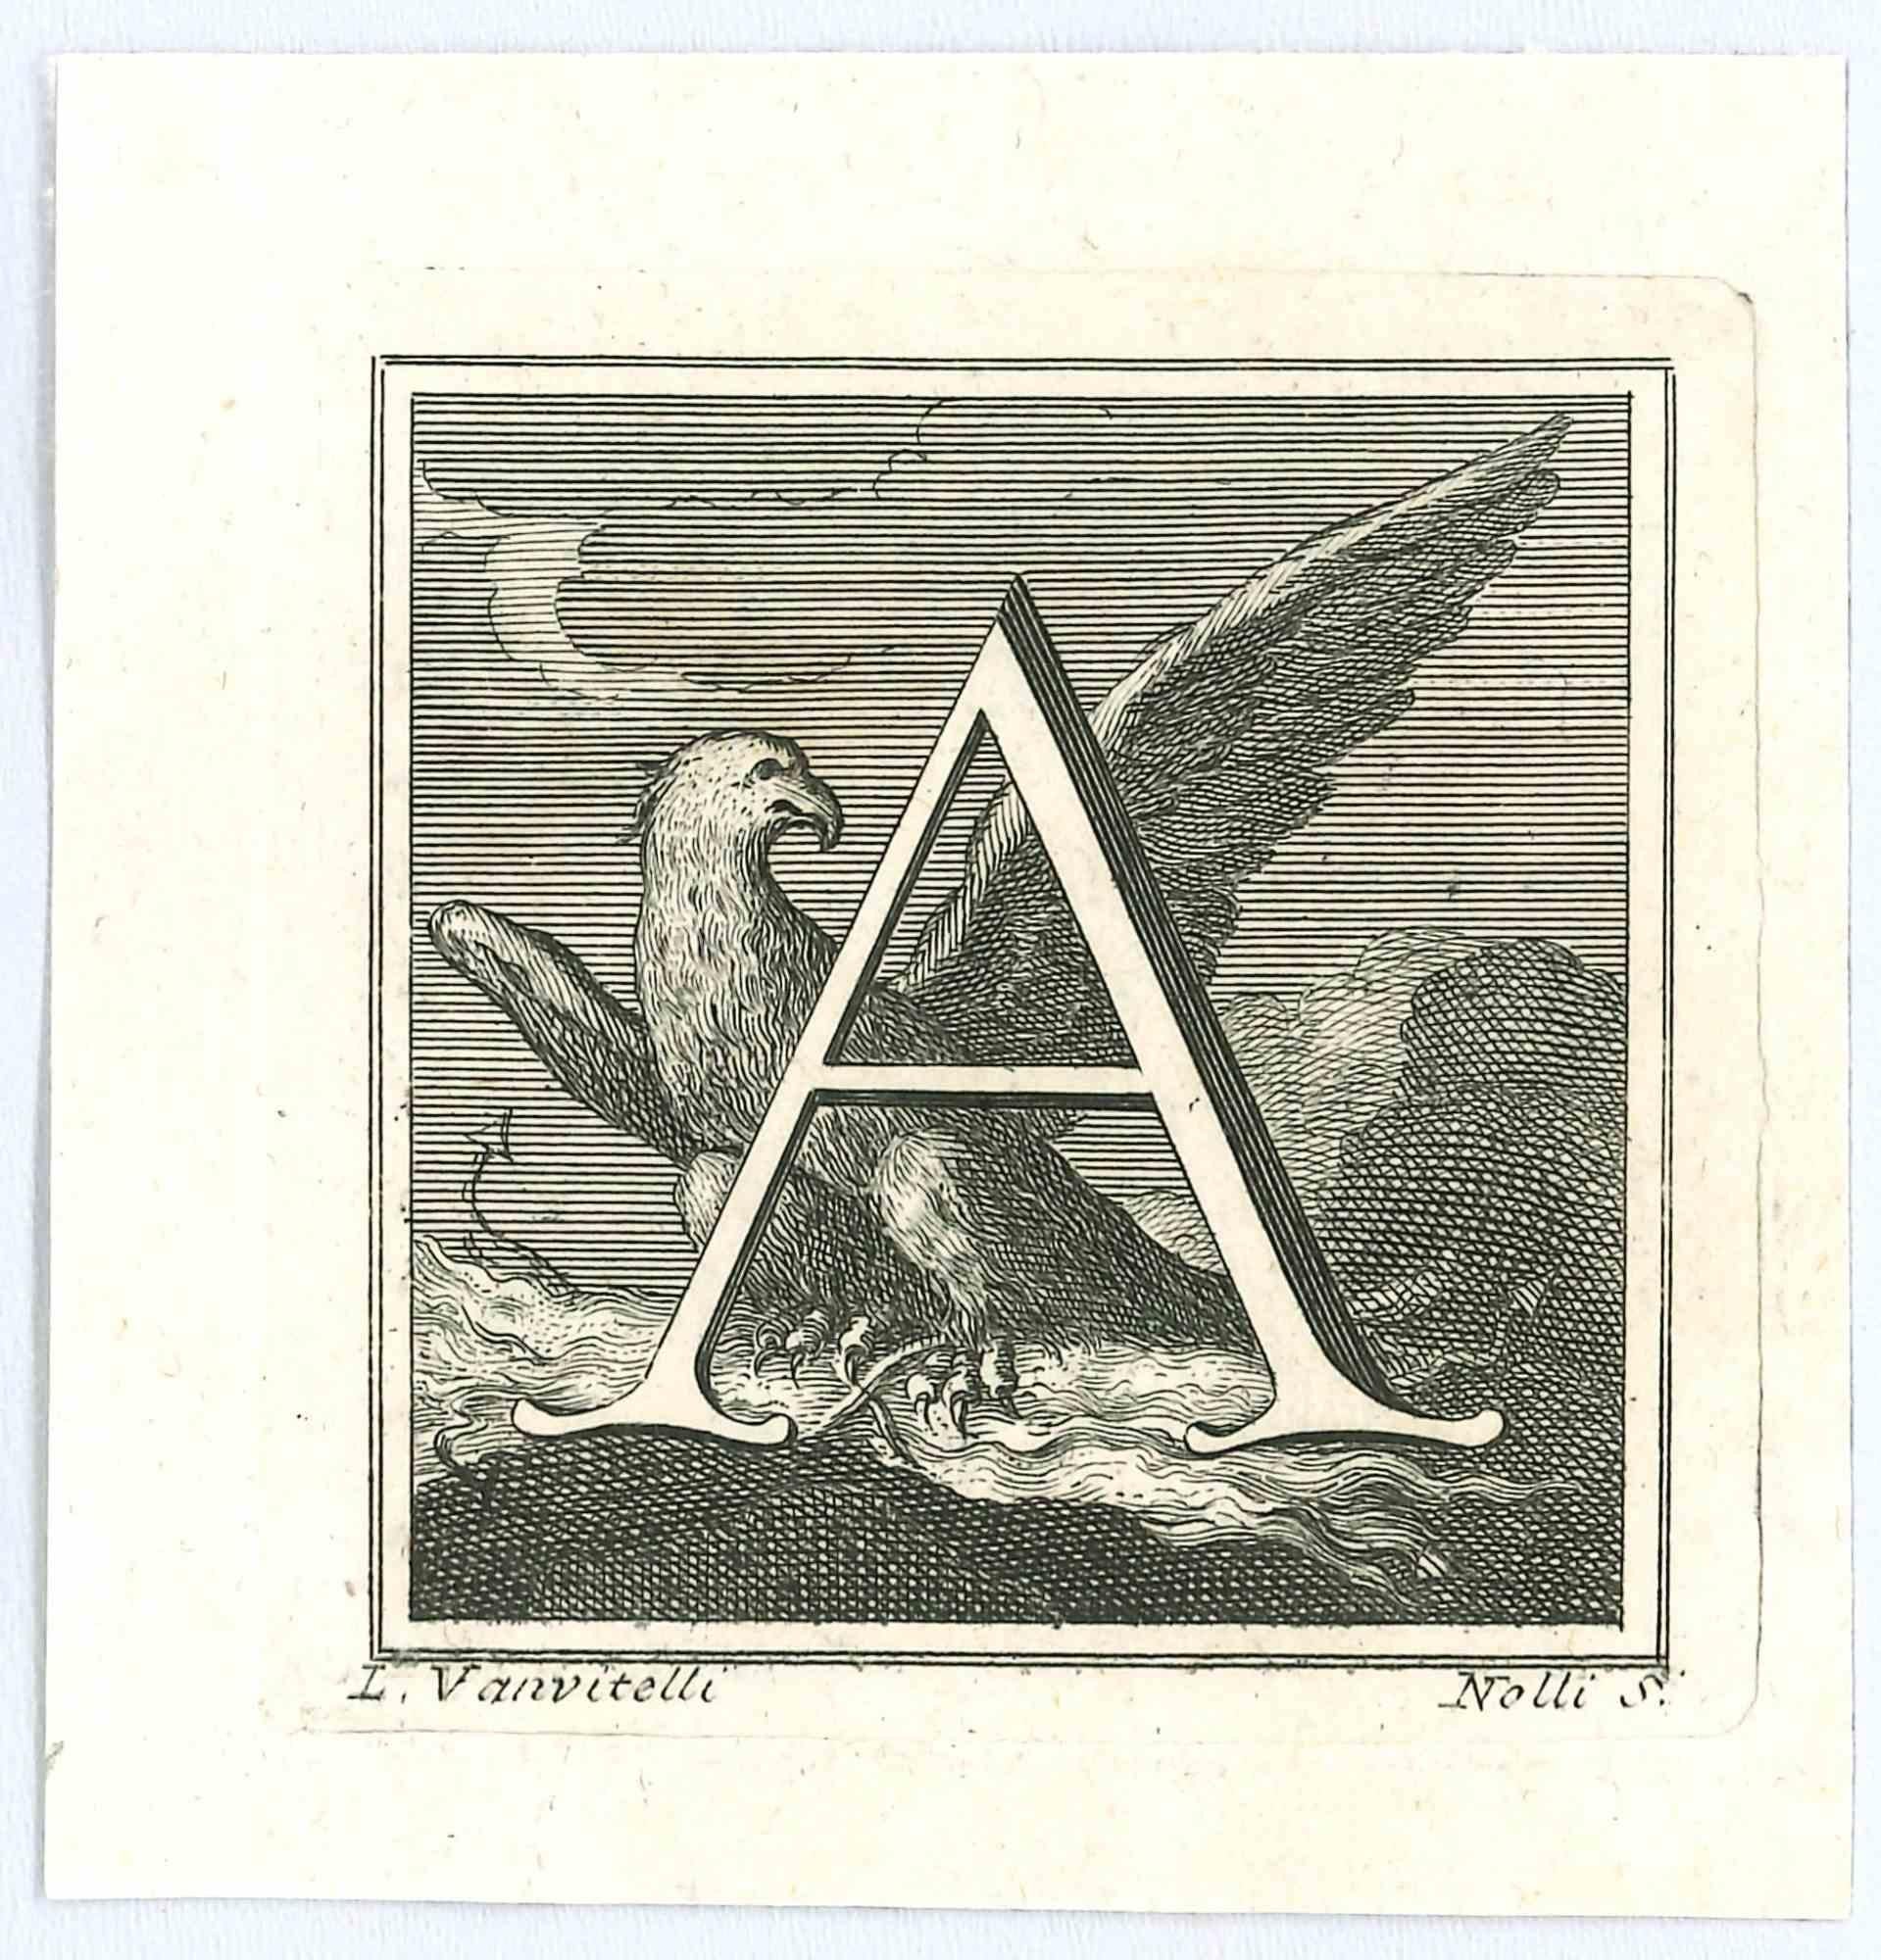 Antiquities of Herculaneum -  Alphabet  L from the series "Antiquities of Herculaneum", is an original etching on paper realized by Carlo Nolli artist in the 18th century.

Signed on the plate on the lower right.

With the script on the rear.

Good